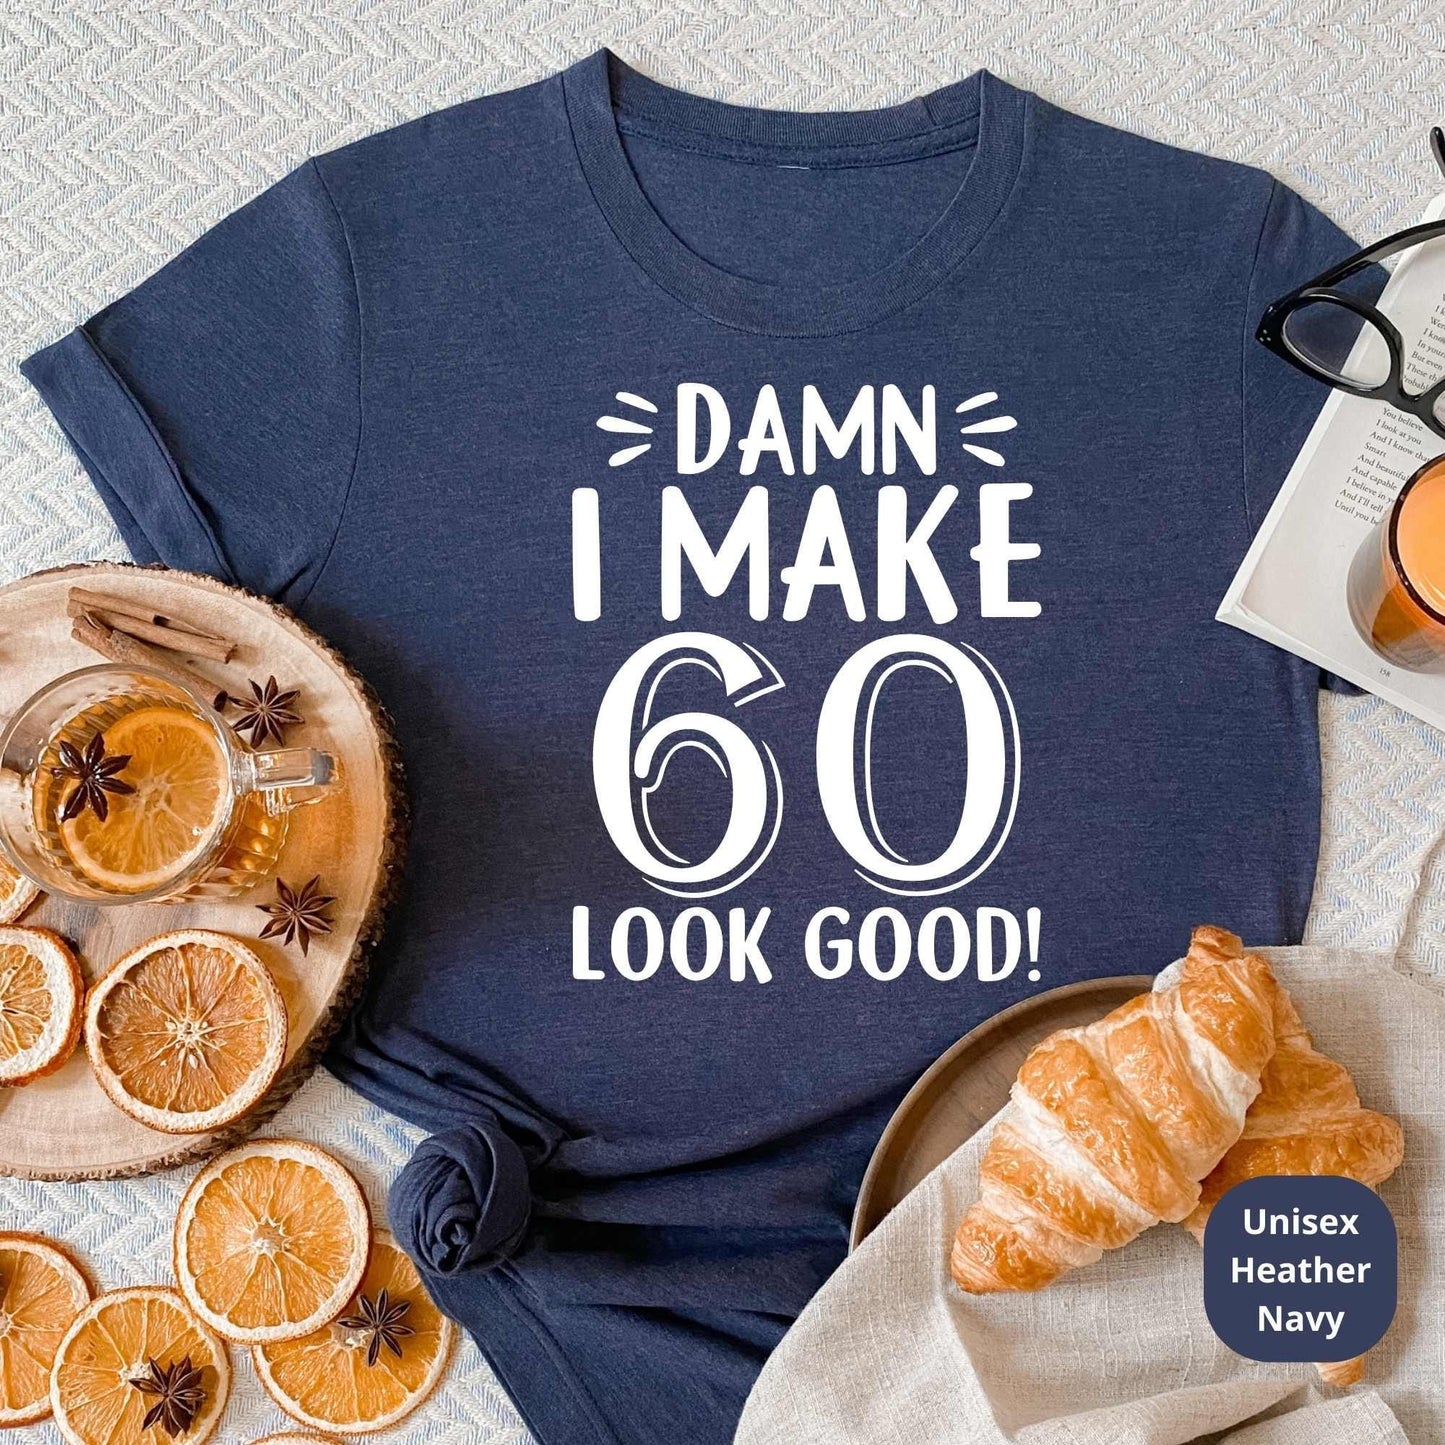 60th Birthday Shirt, 60th Birthday Gift, Great for Grand Parents, Mom, Dad, Aunt, Cousins & Loved Ones Bday Party or Anniversary Celebration